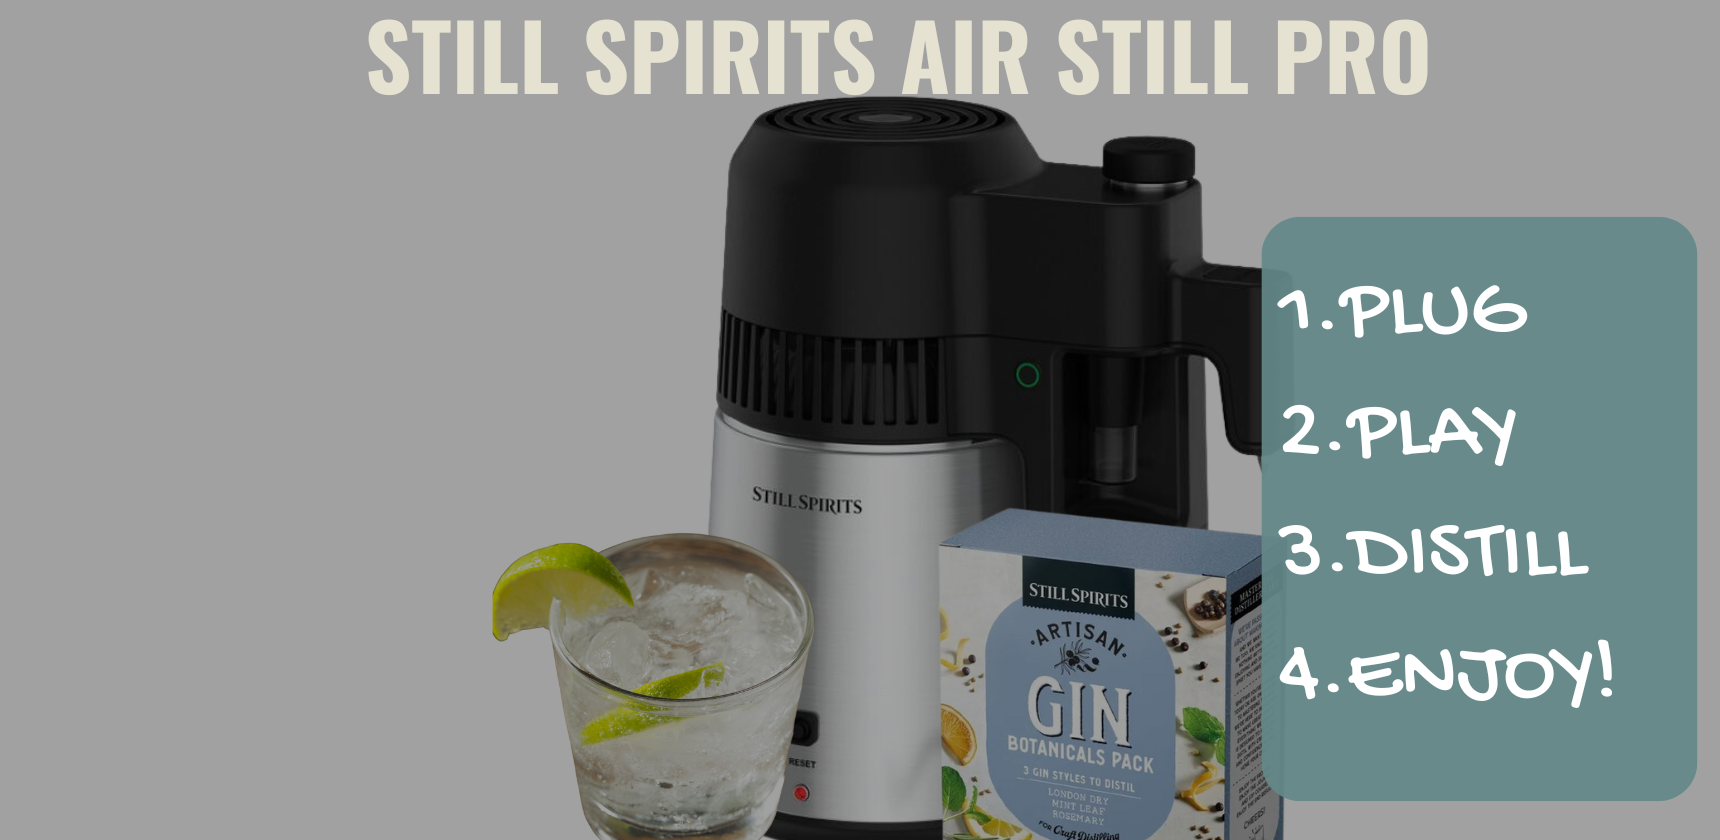 DISCOVER DISTILLATION WITH THE AIR STILL PRO